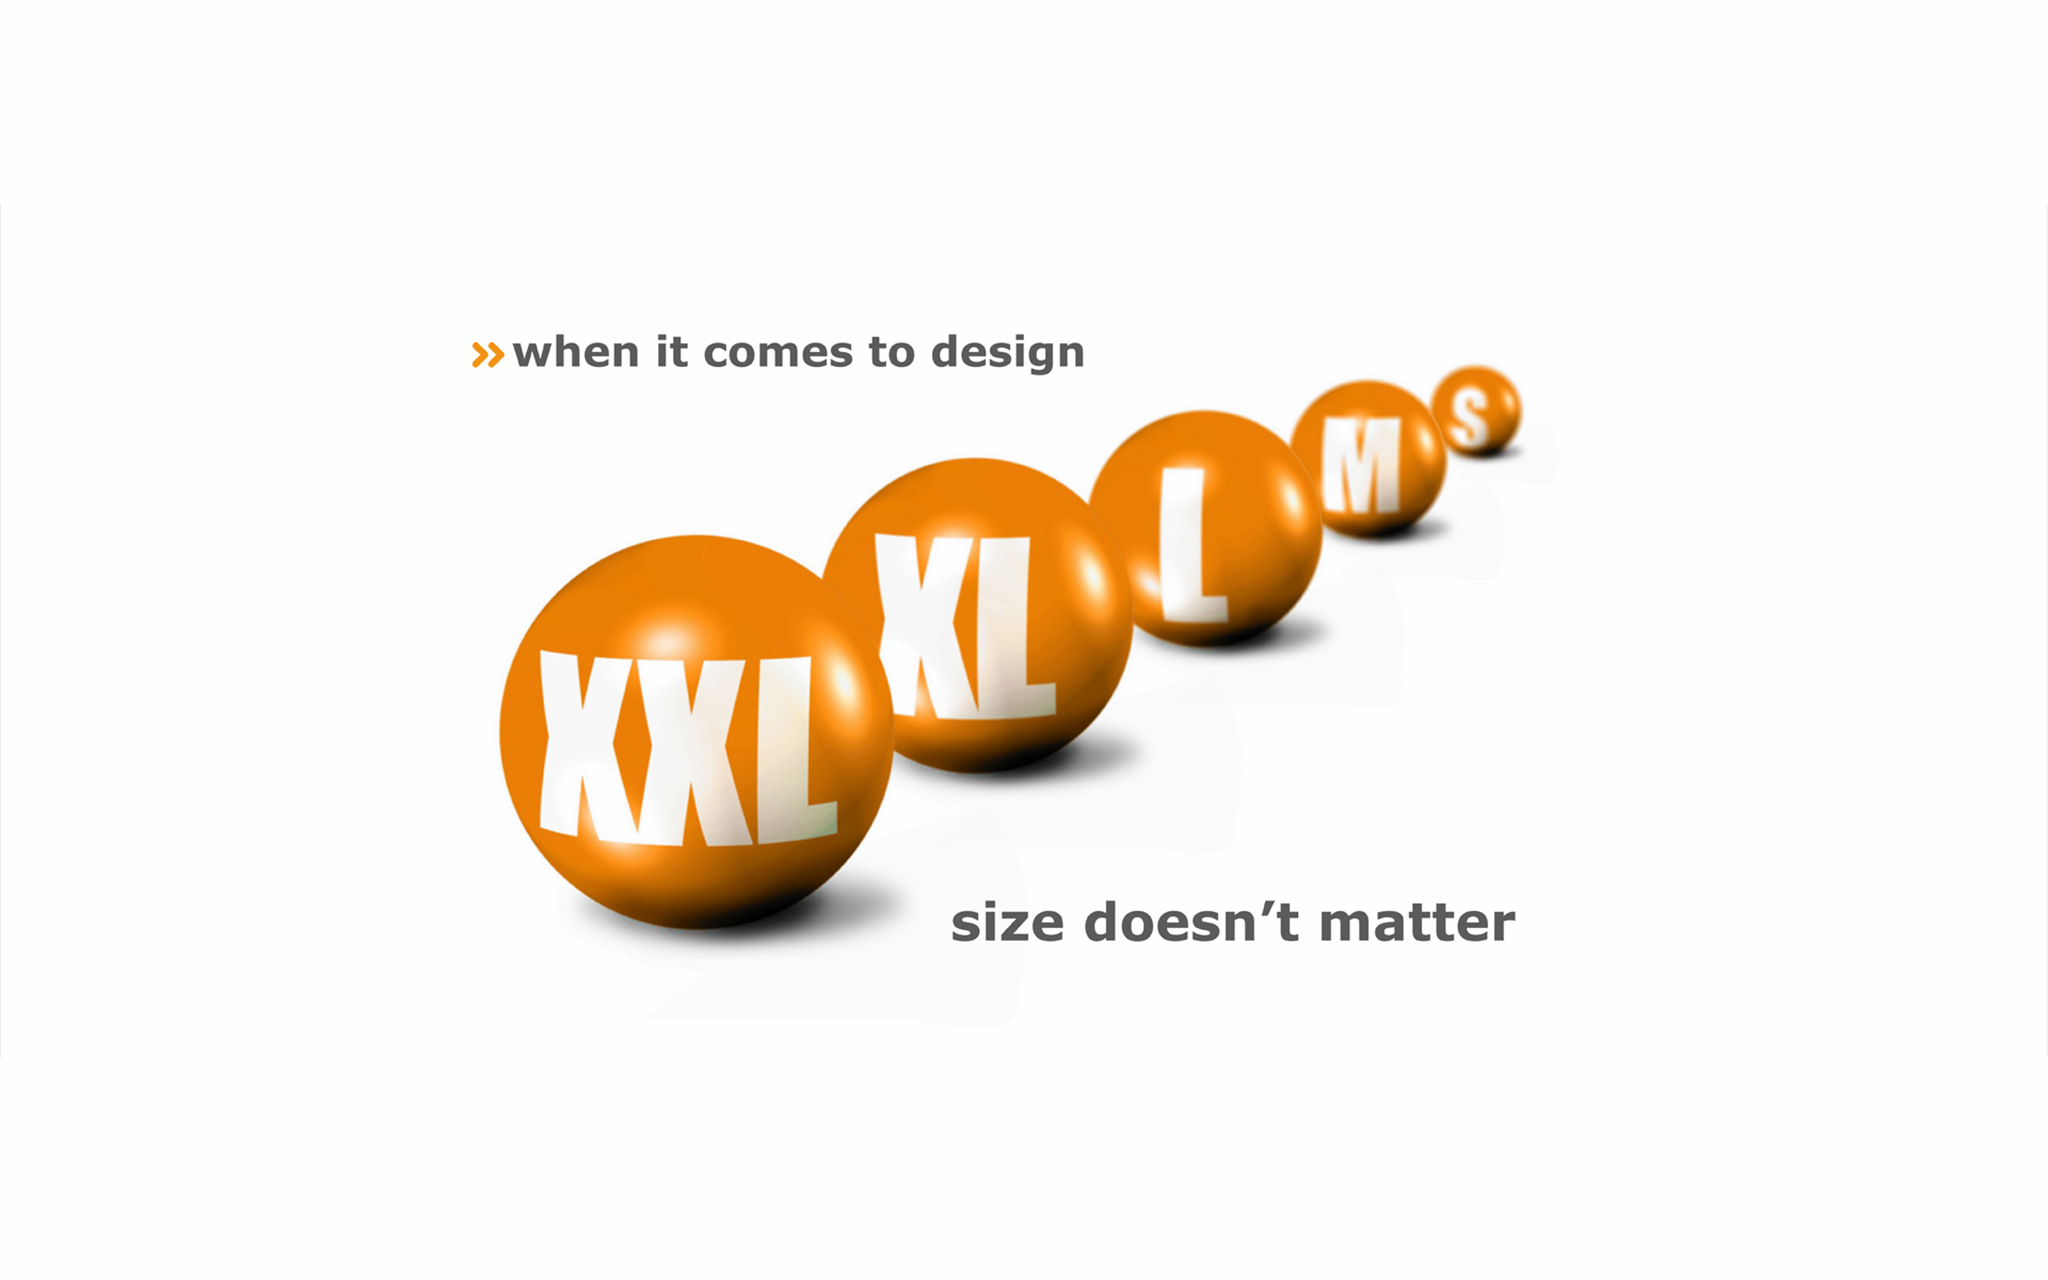 Graphic that says "size does not matter"